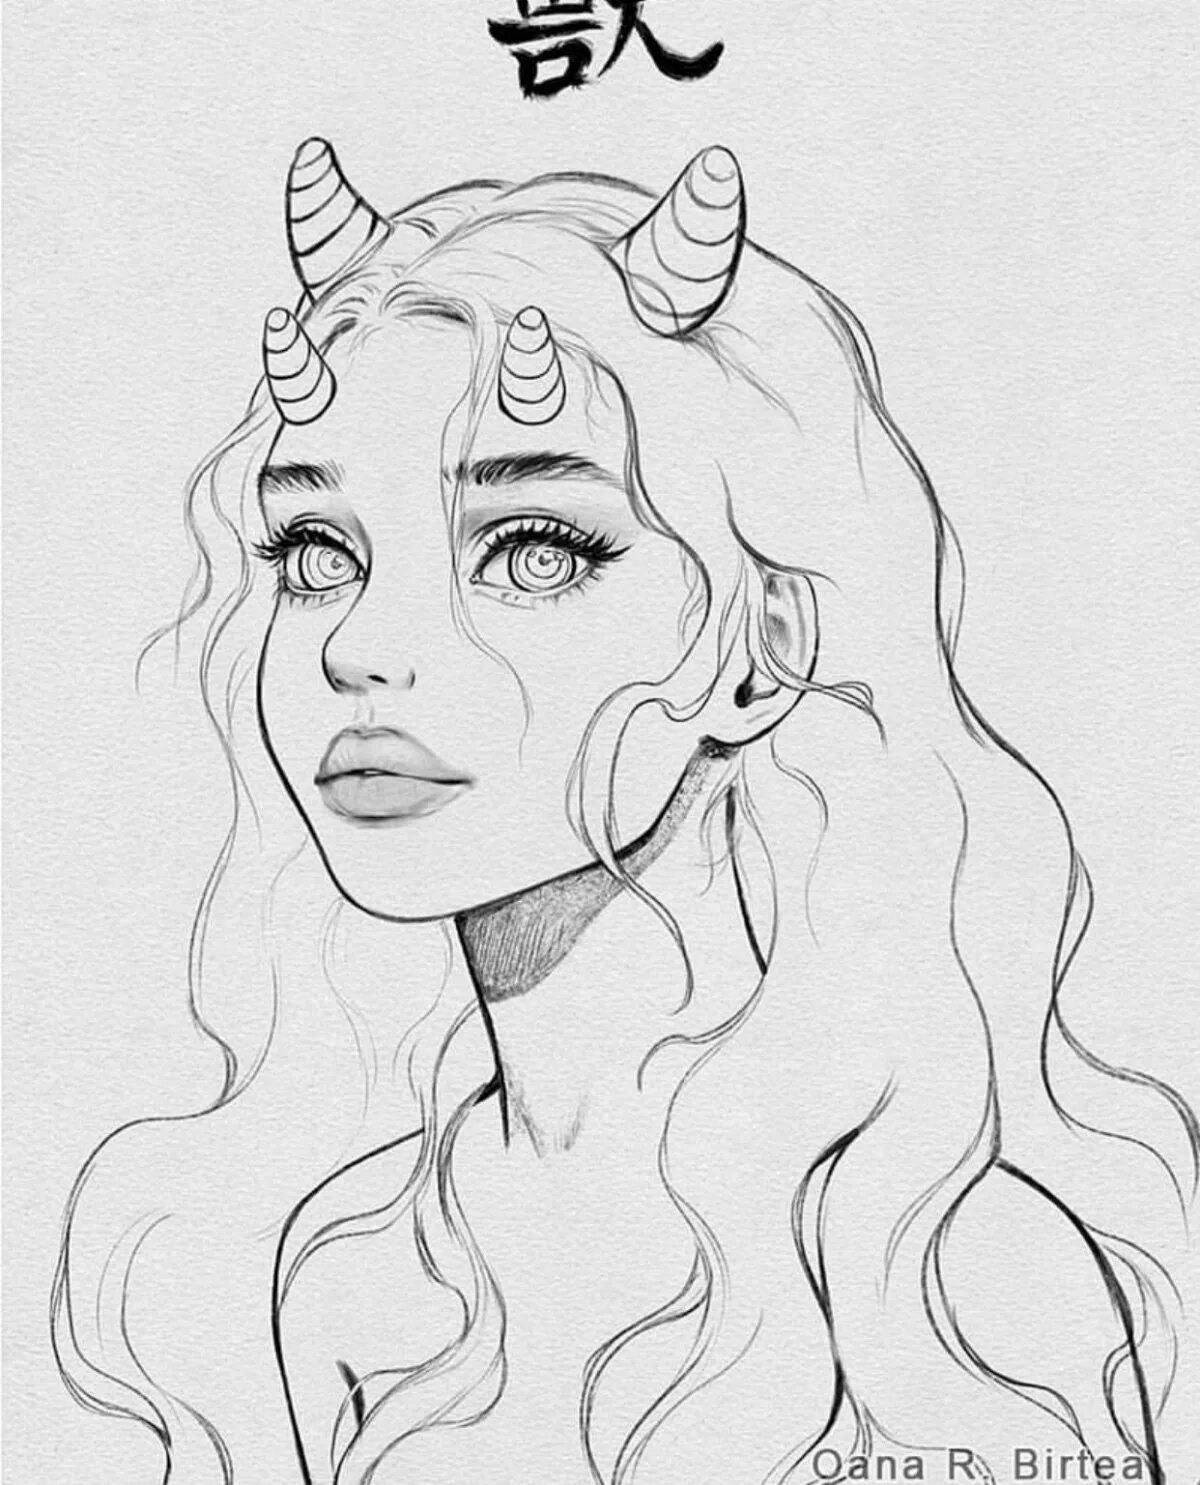 Incredible coloring of a girl with horns